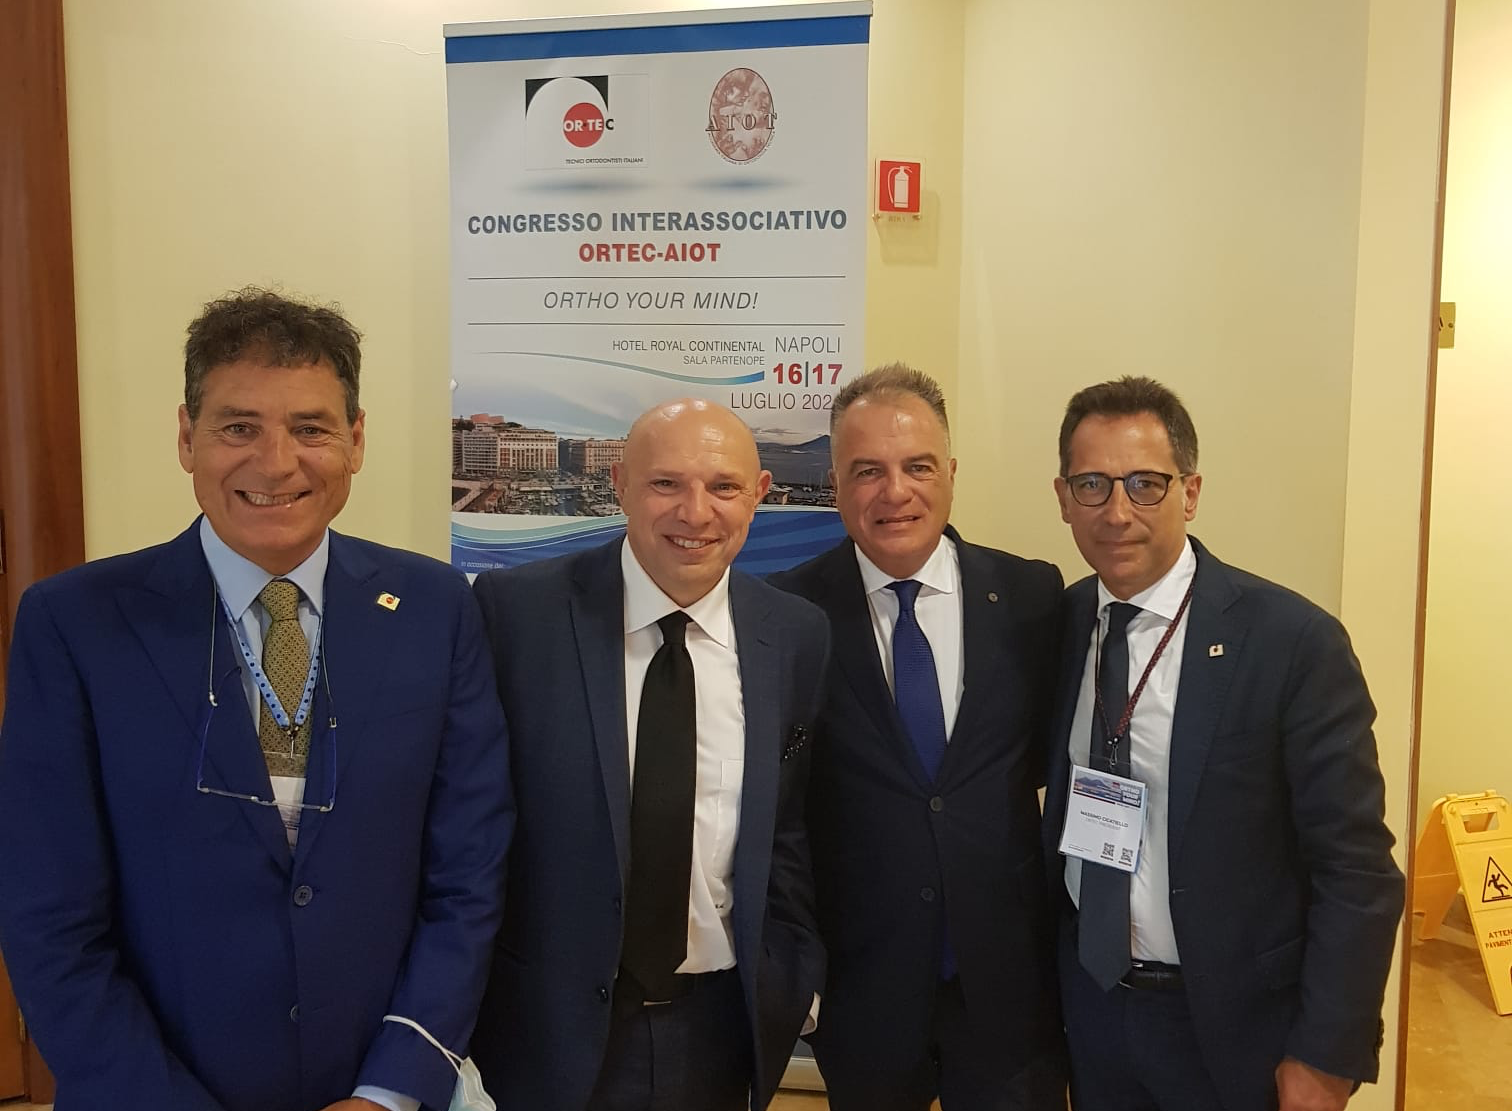 Ortho your mind, rinnovate le sinergie associative al meeting di Napoli